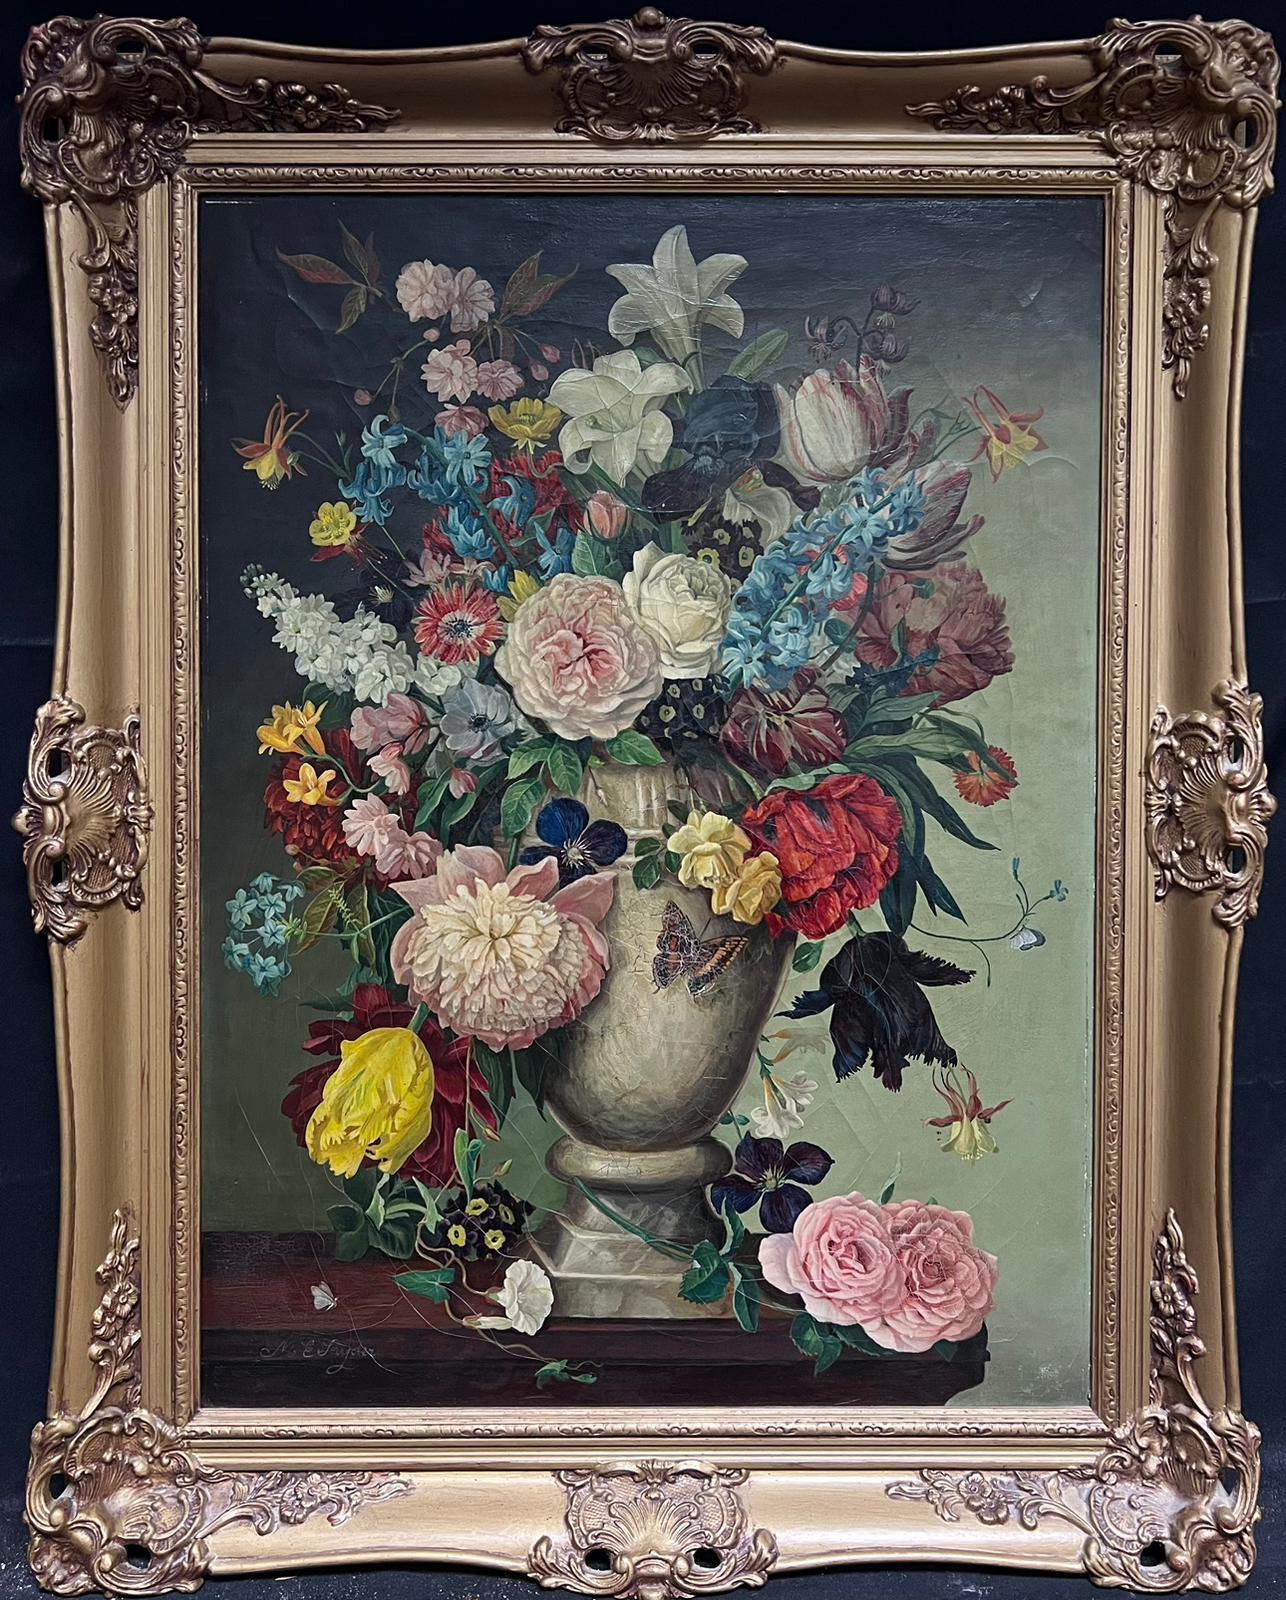 'Summer Flowers'
by Margaret Ryder (British b. 1908)
signed oil on canvas, framed
frame: 33 x 26 inches
canvas: 27 x 20 inches
provenance: private collection, UK
Exhibited at the Royal Institute of Oil Painters, London
condition: very good and sound